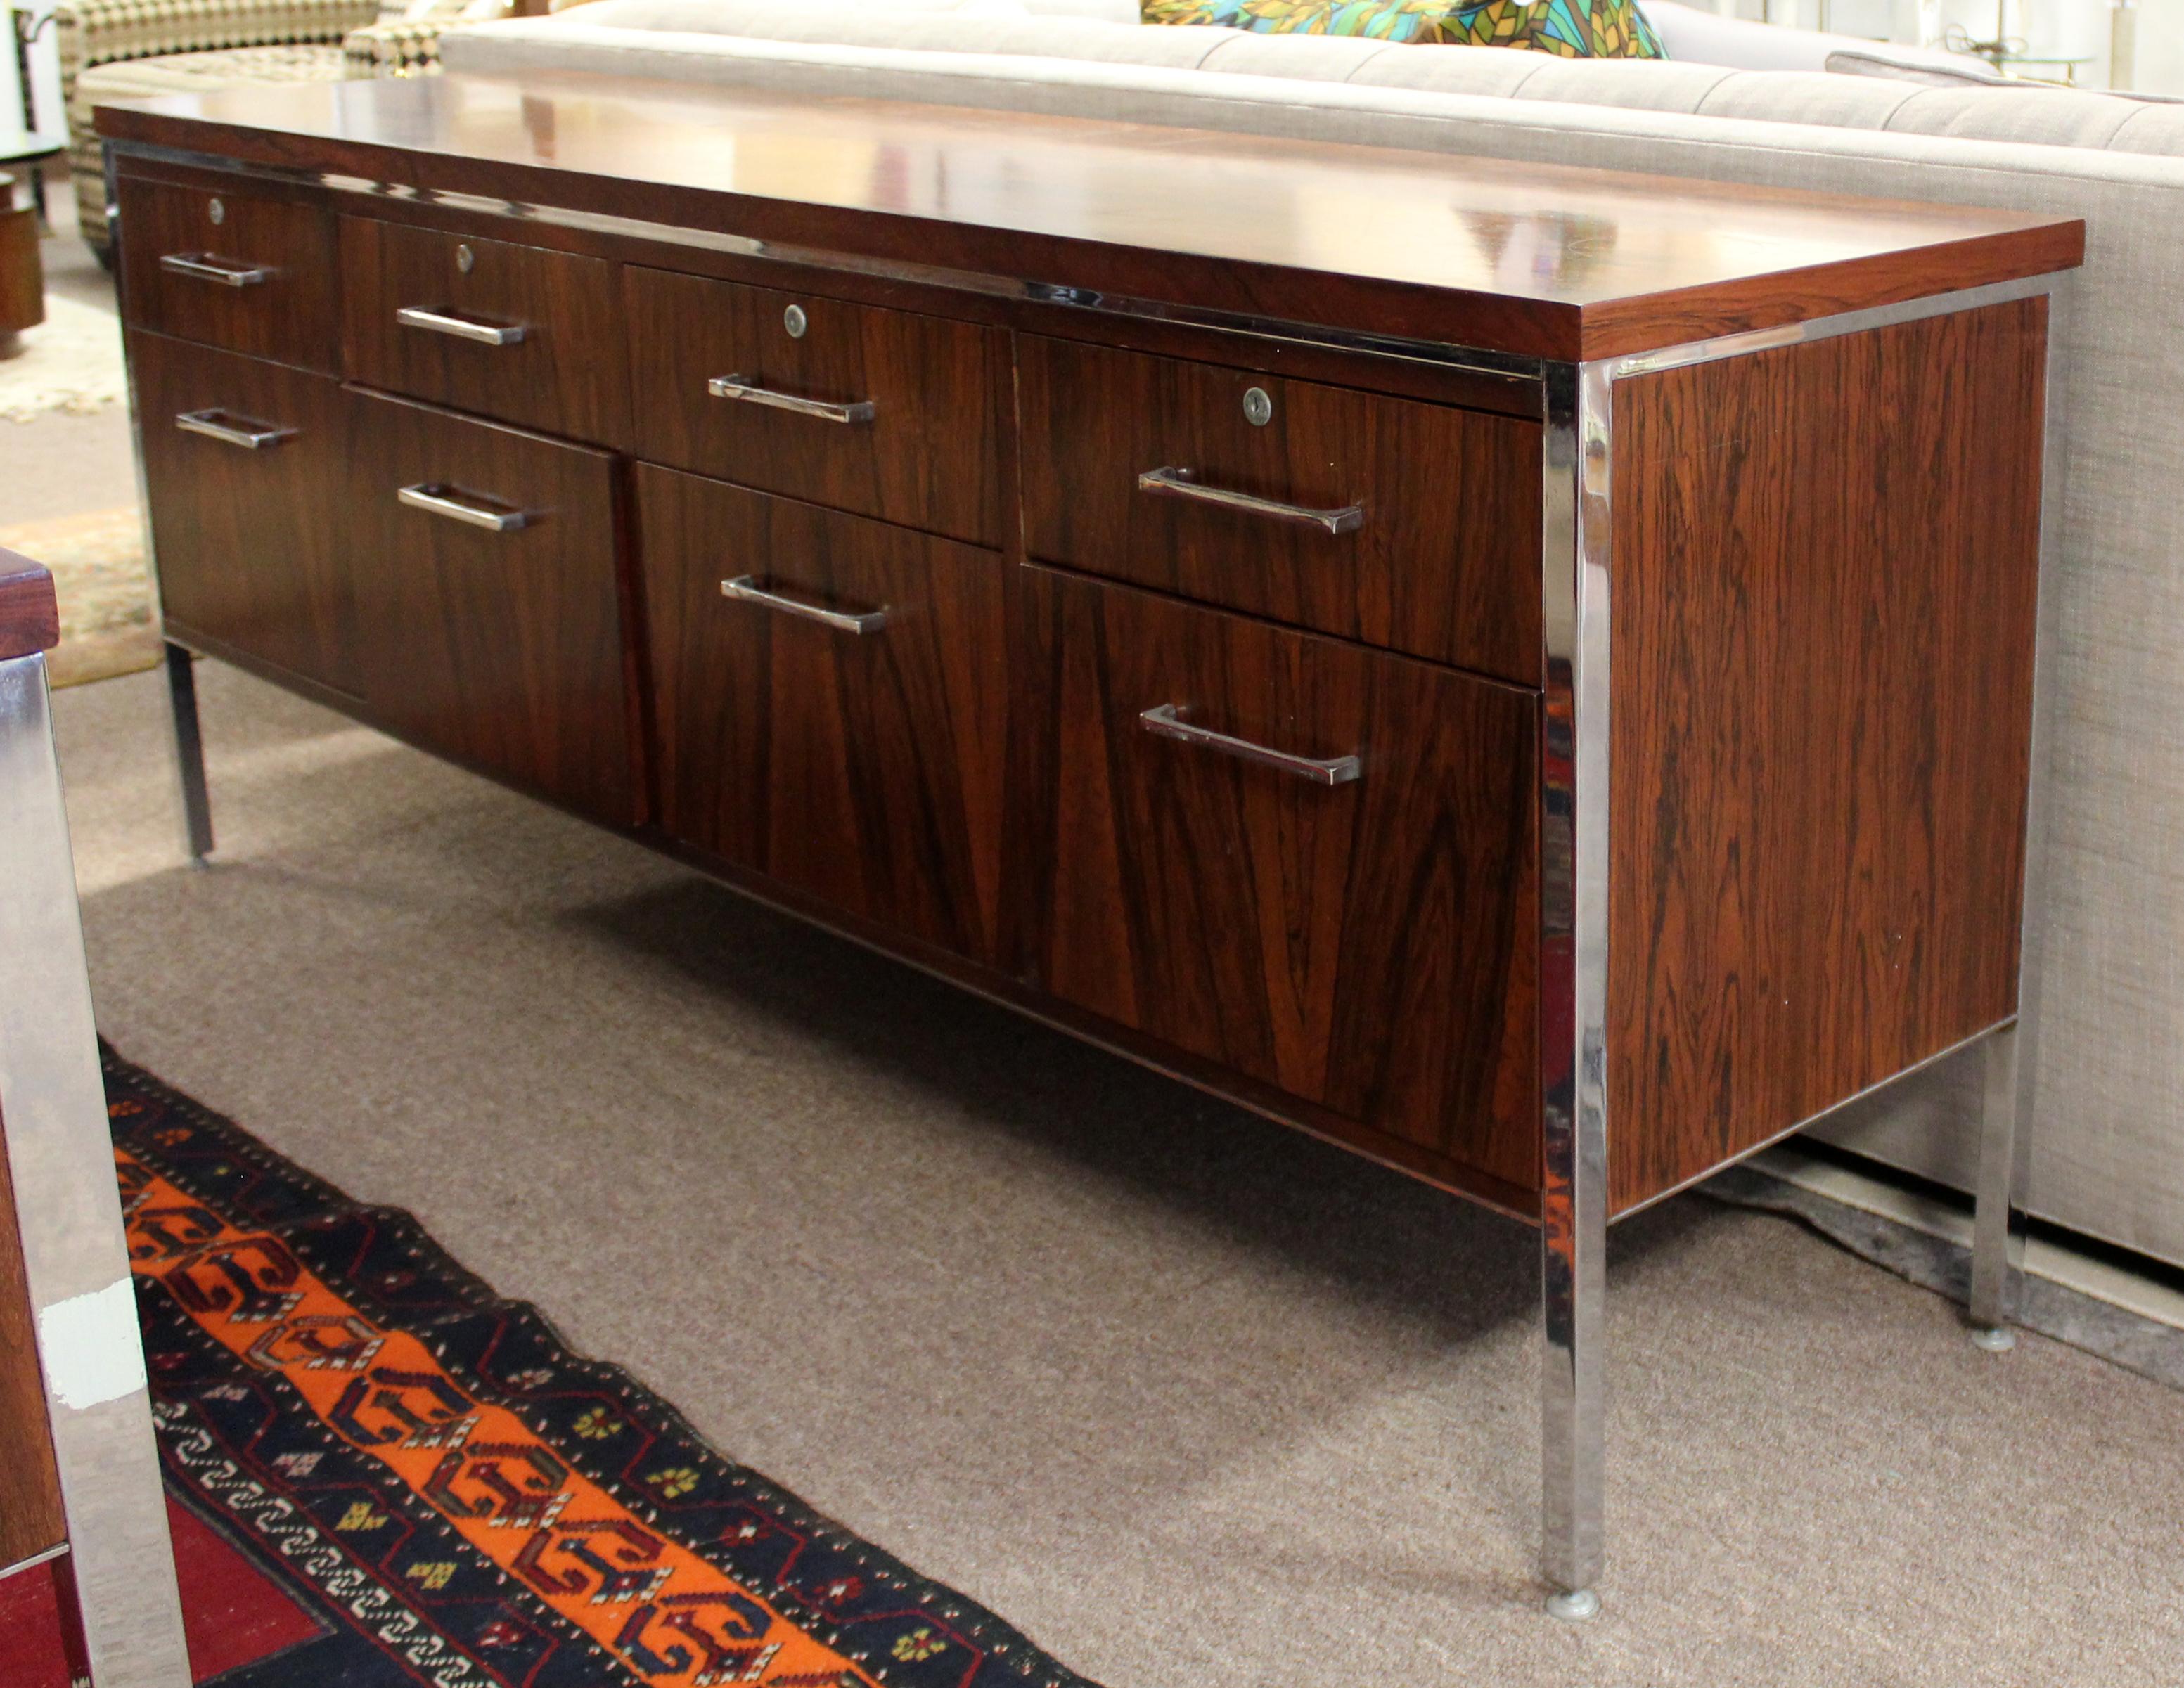 For your consideration is a phenomenal, executive desk and credenza file cabinet, made of rosewood, with filing drawers, by Alma Desk Company, circa 1960s. In fair vintage condition. The dimensions of the credenza are 72